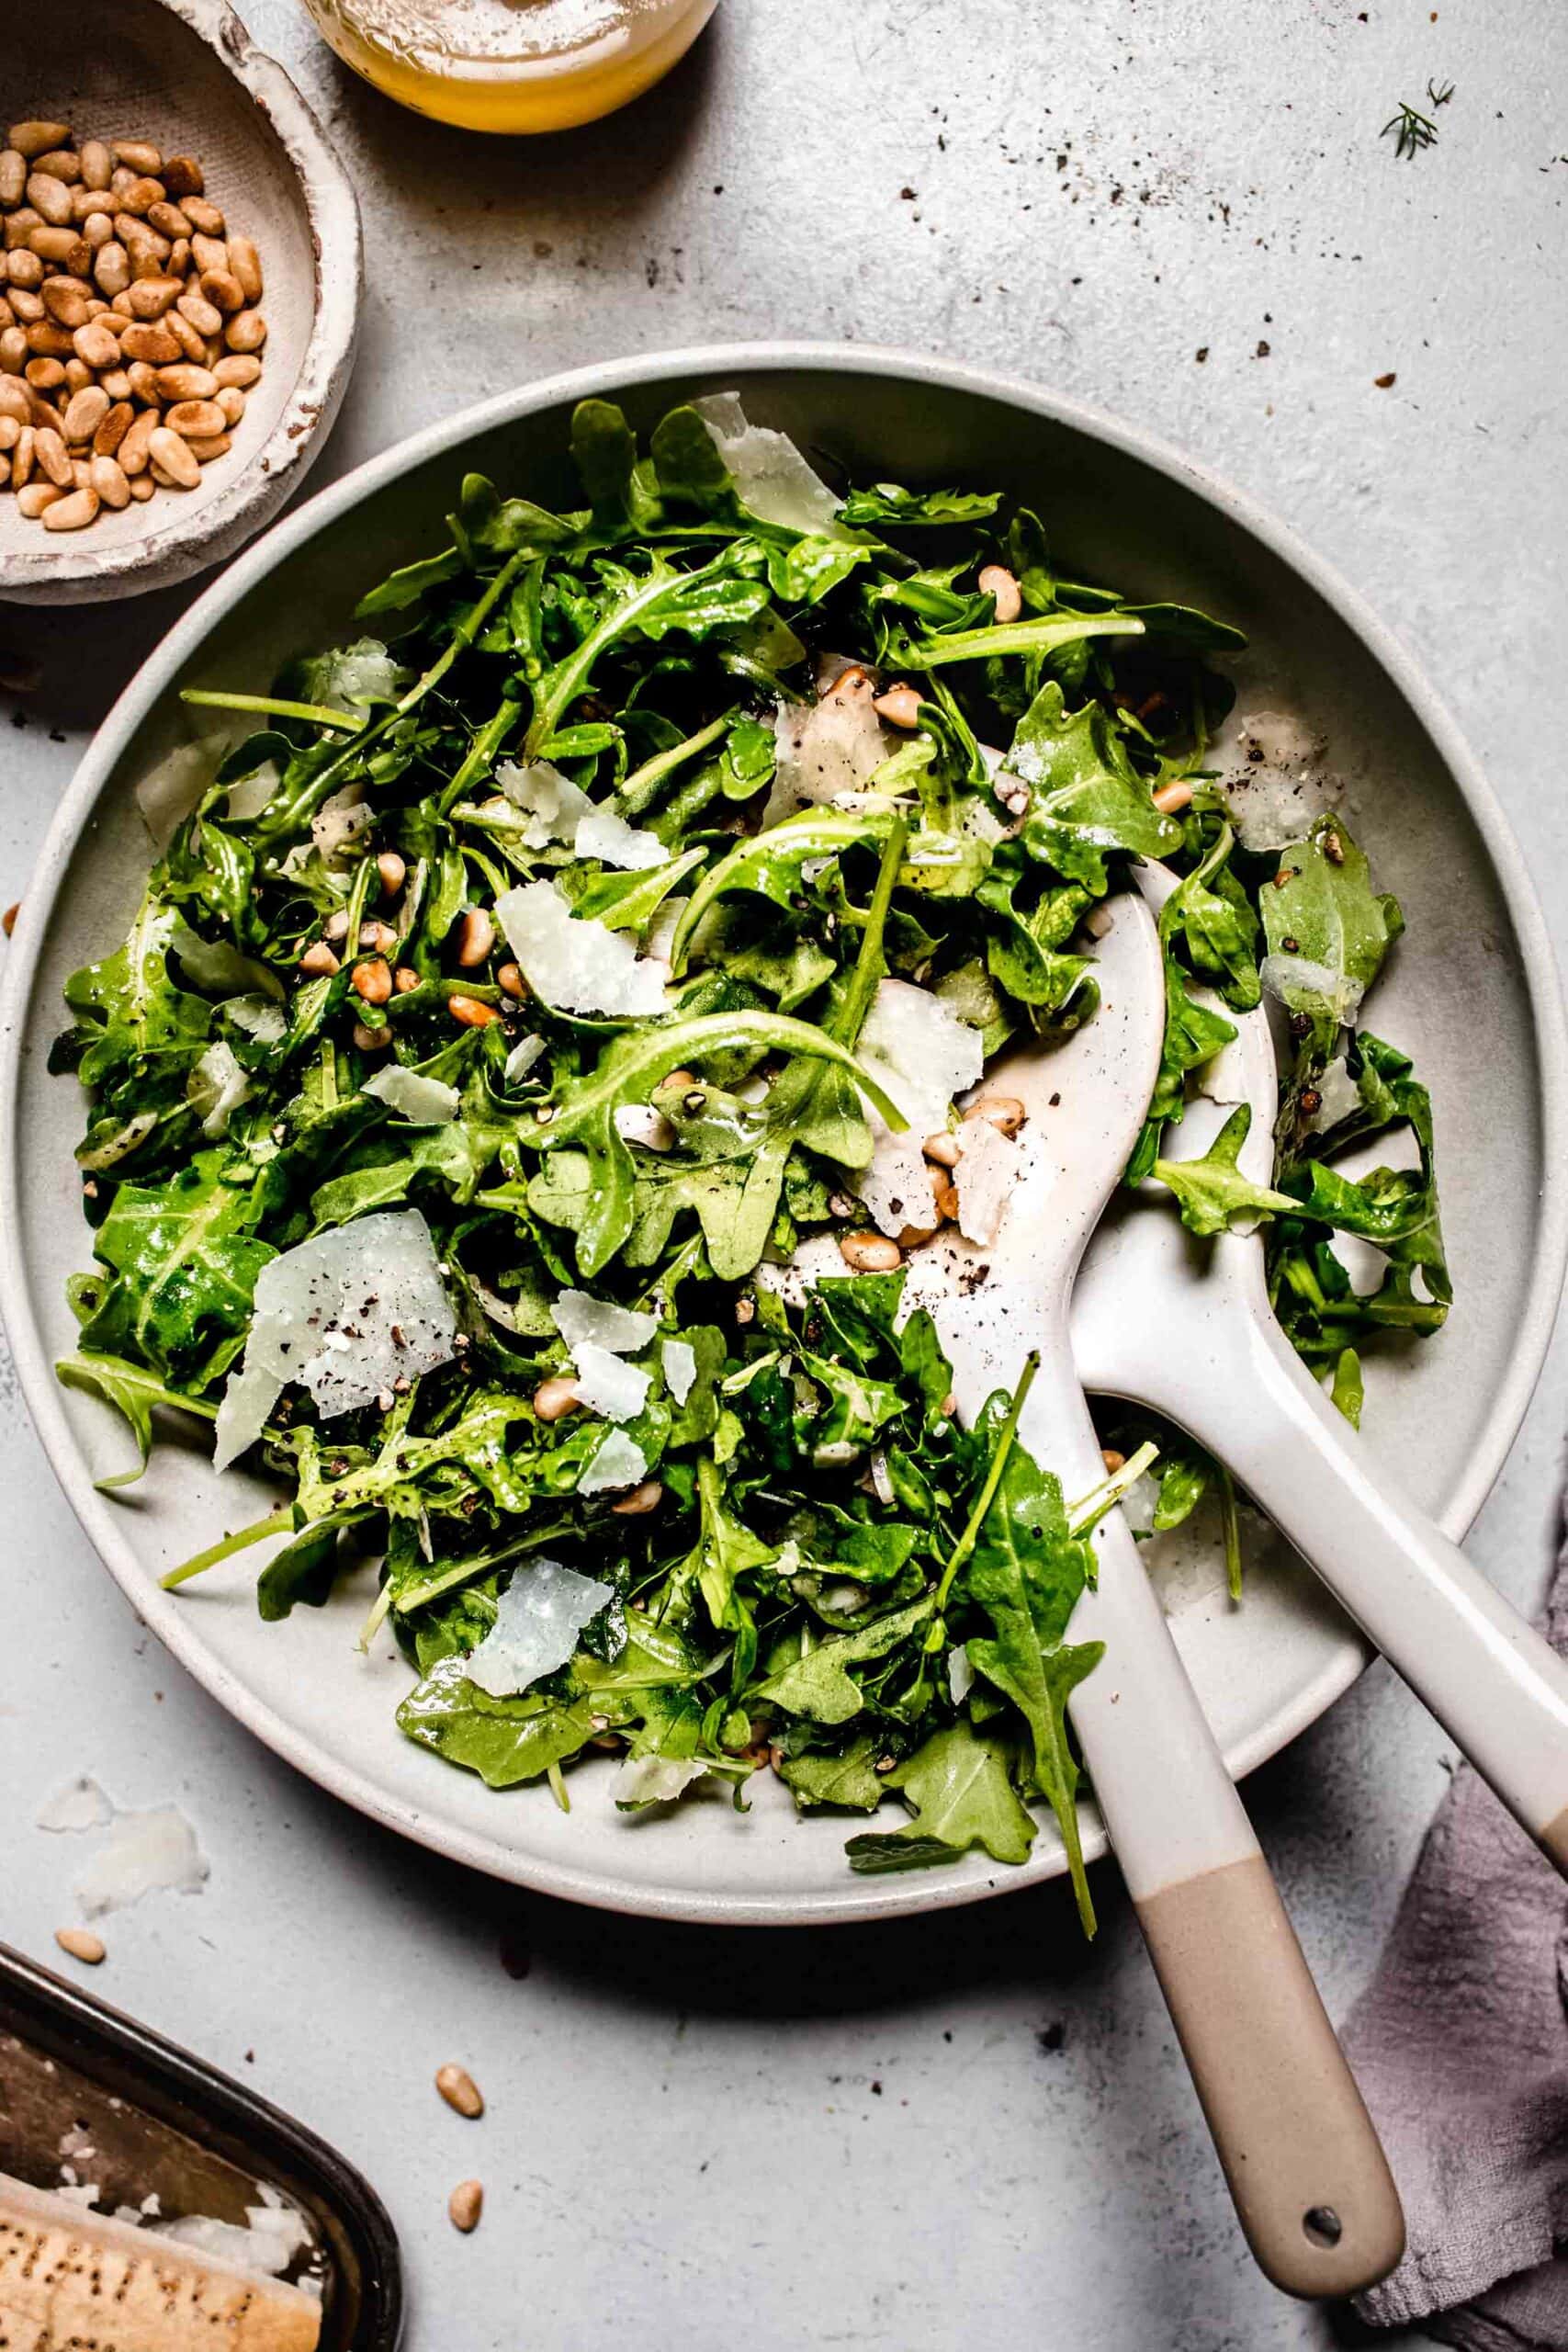 Prepared arugula salad in white bowl with serving spoons.